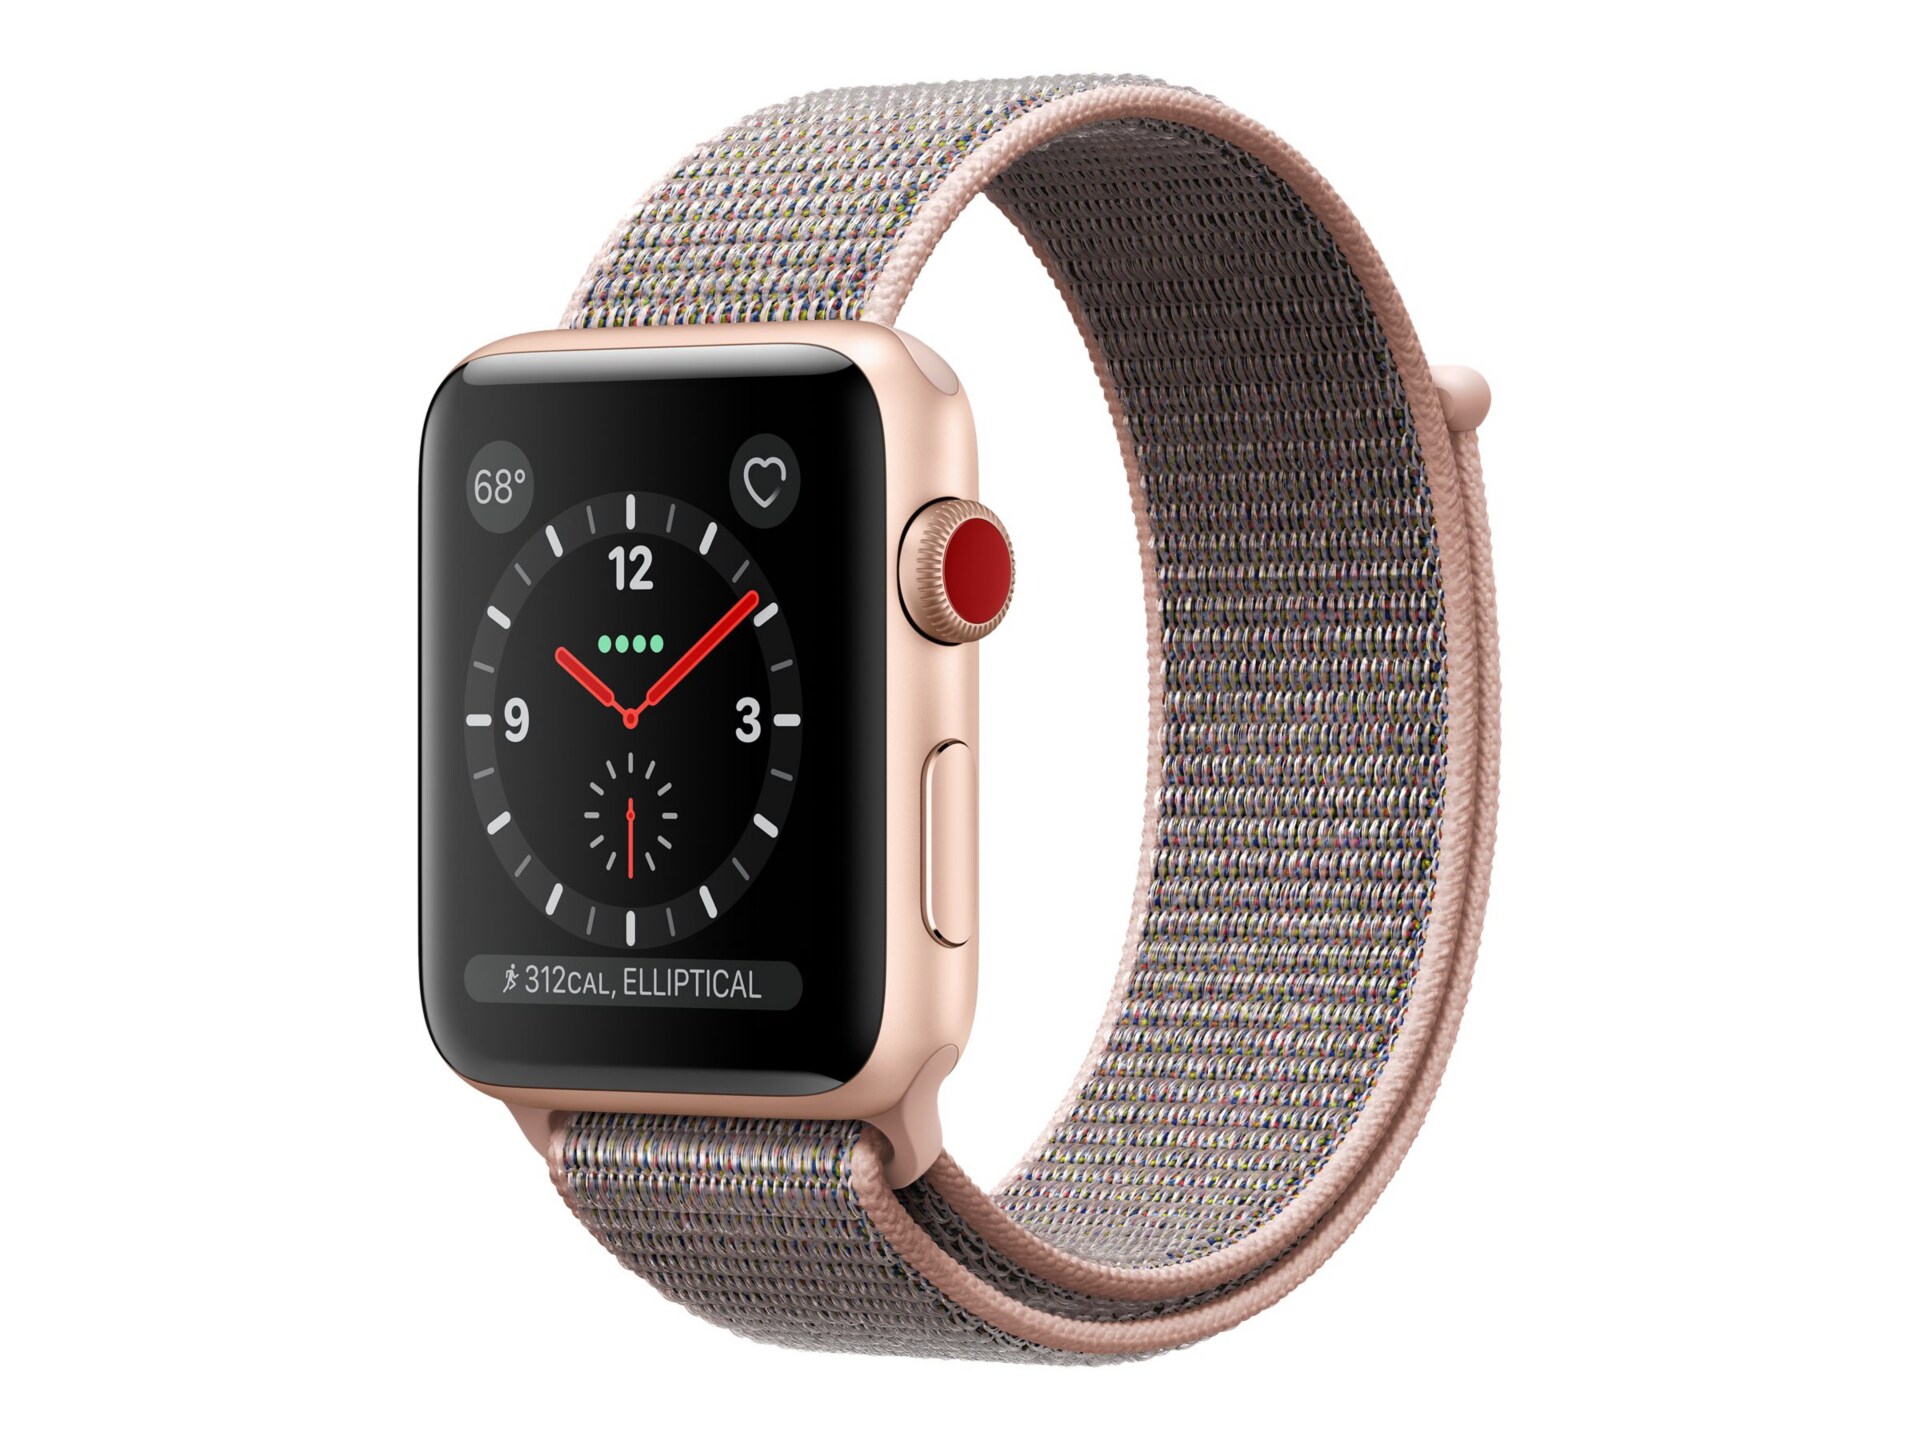 Apple Watch Series 3 (GPS + Cellular) - gold aluminum - smart watch with sport loop - pink sand - 16 GB - not specified